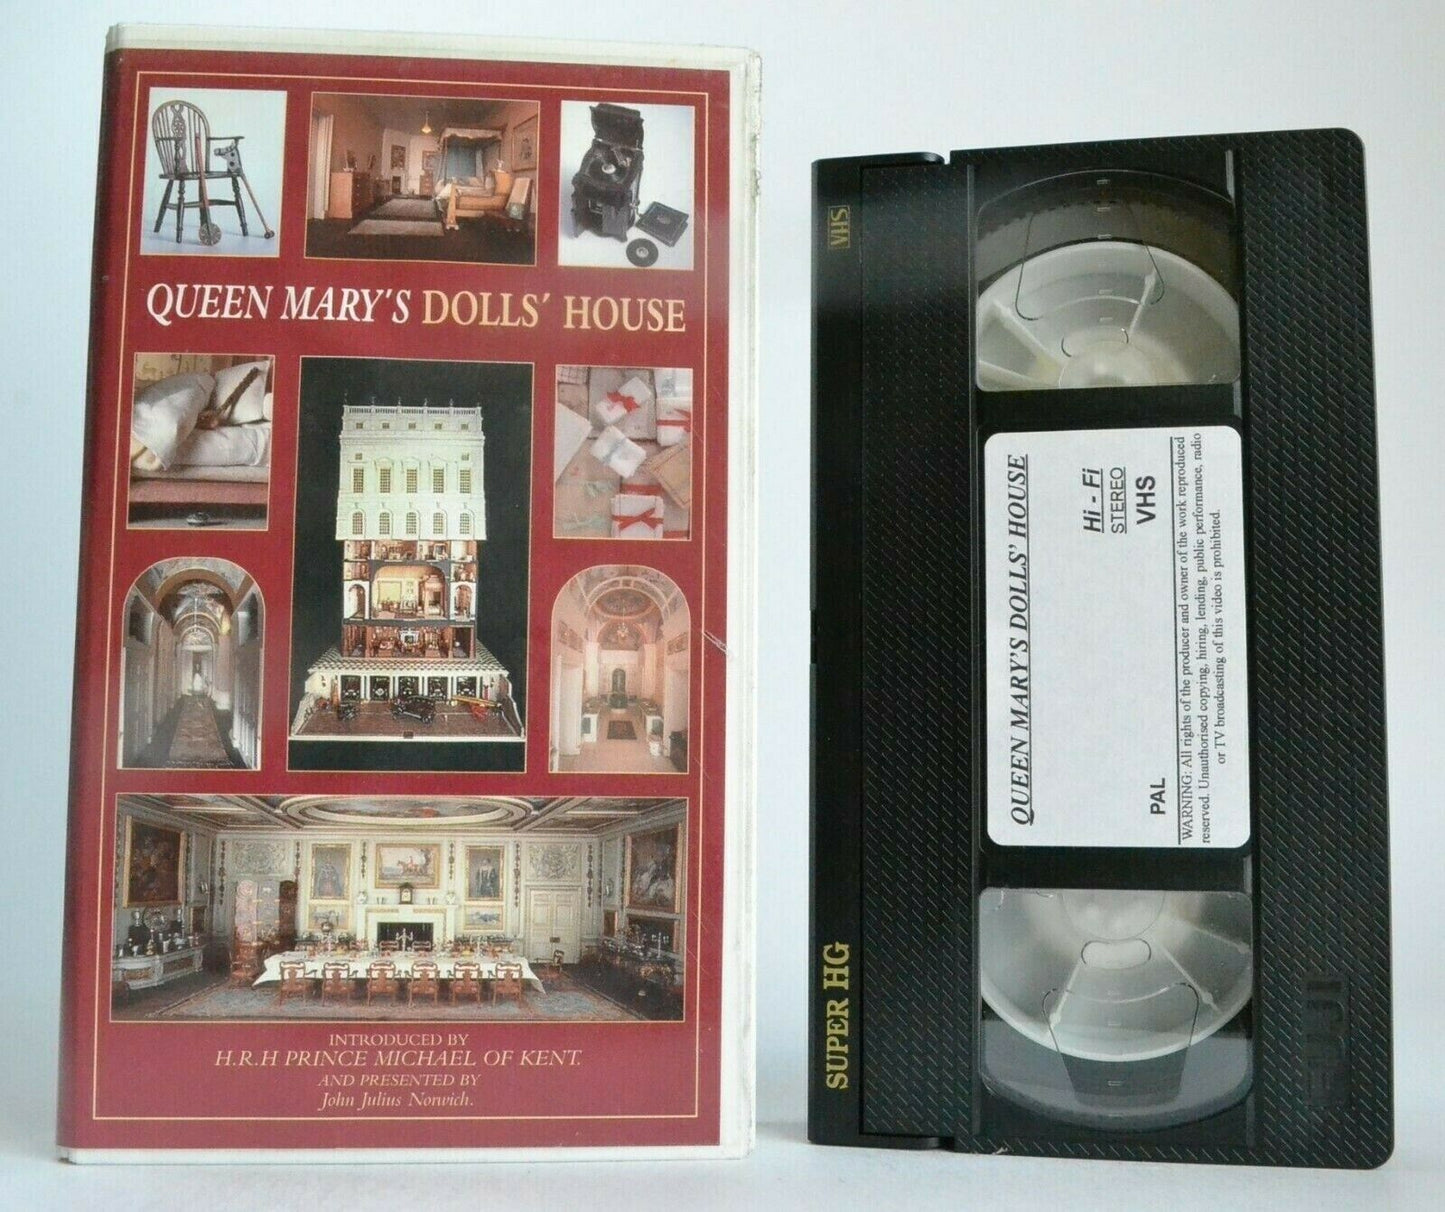 Queen Mary's Dolls' House: By John Julius Norwich - Stately Home Design - VHS-